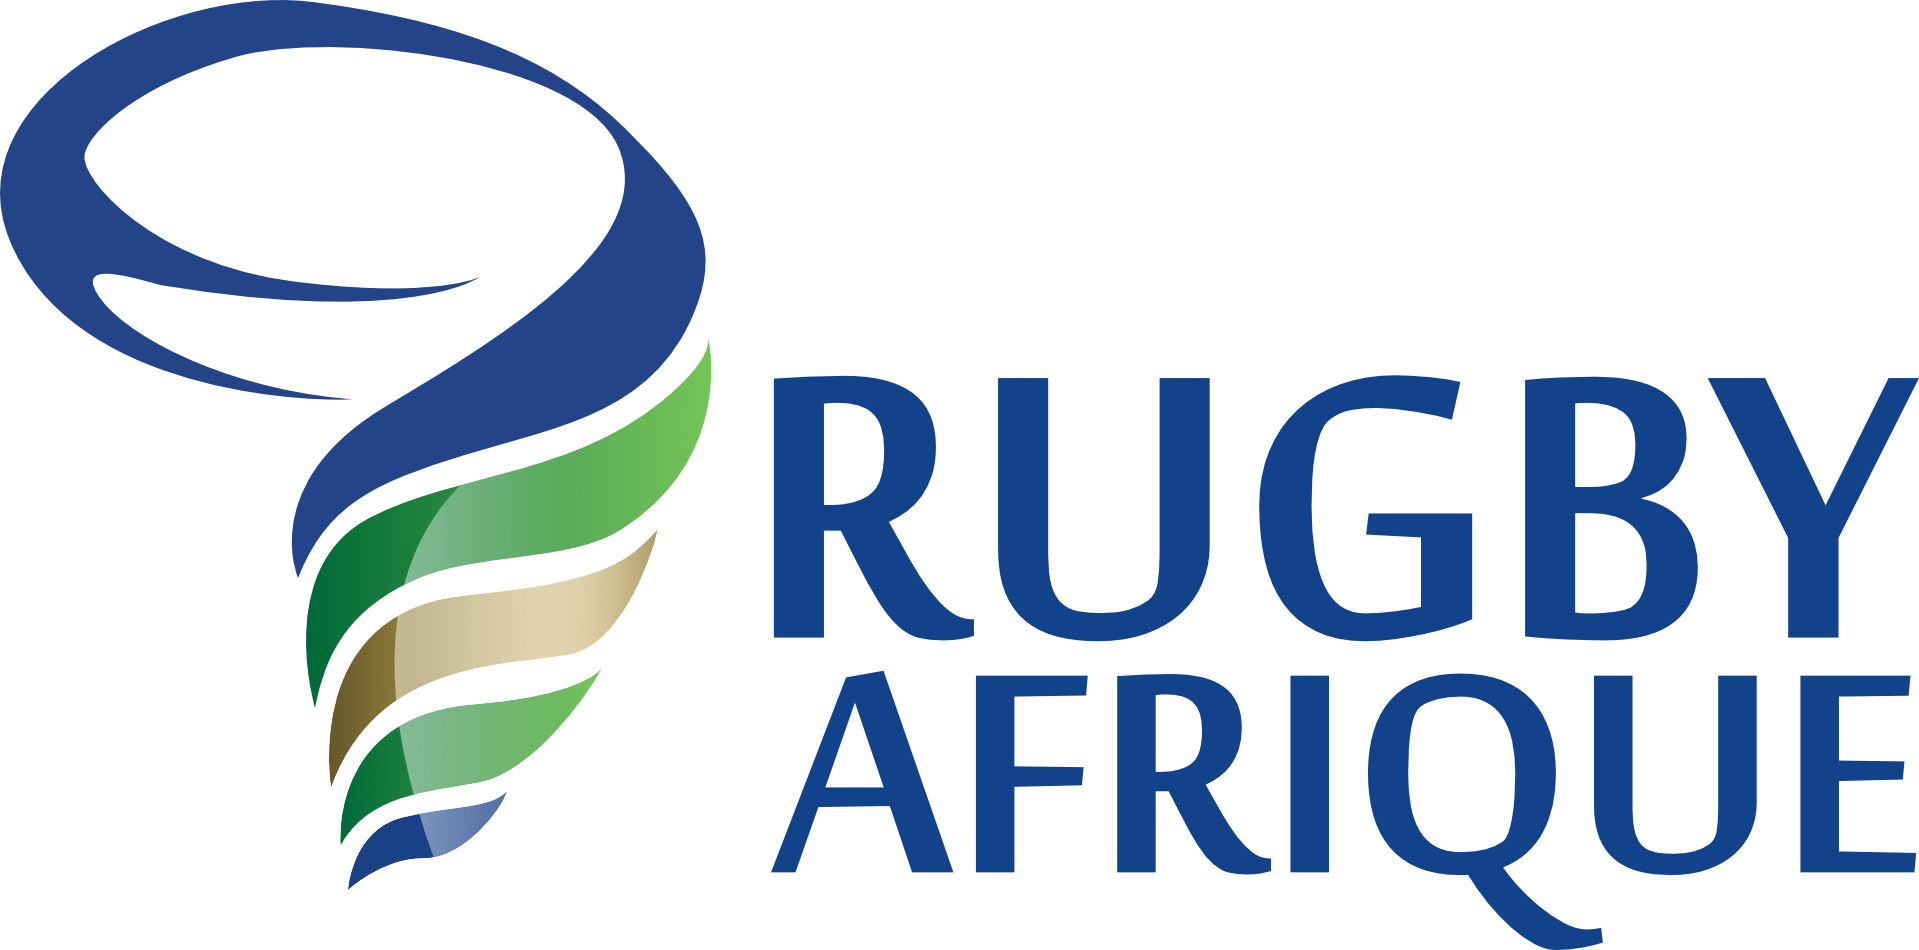 Media Invitation – Rugby World Cup Final: Online Press Conference of the President of Rugby Africa, the governing body of rugby in Africa